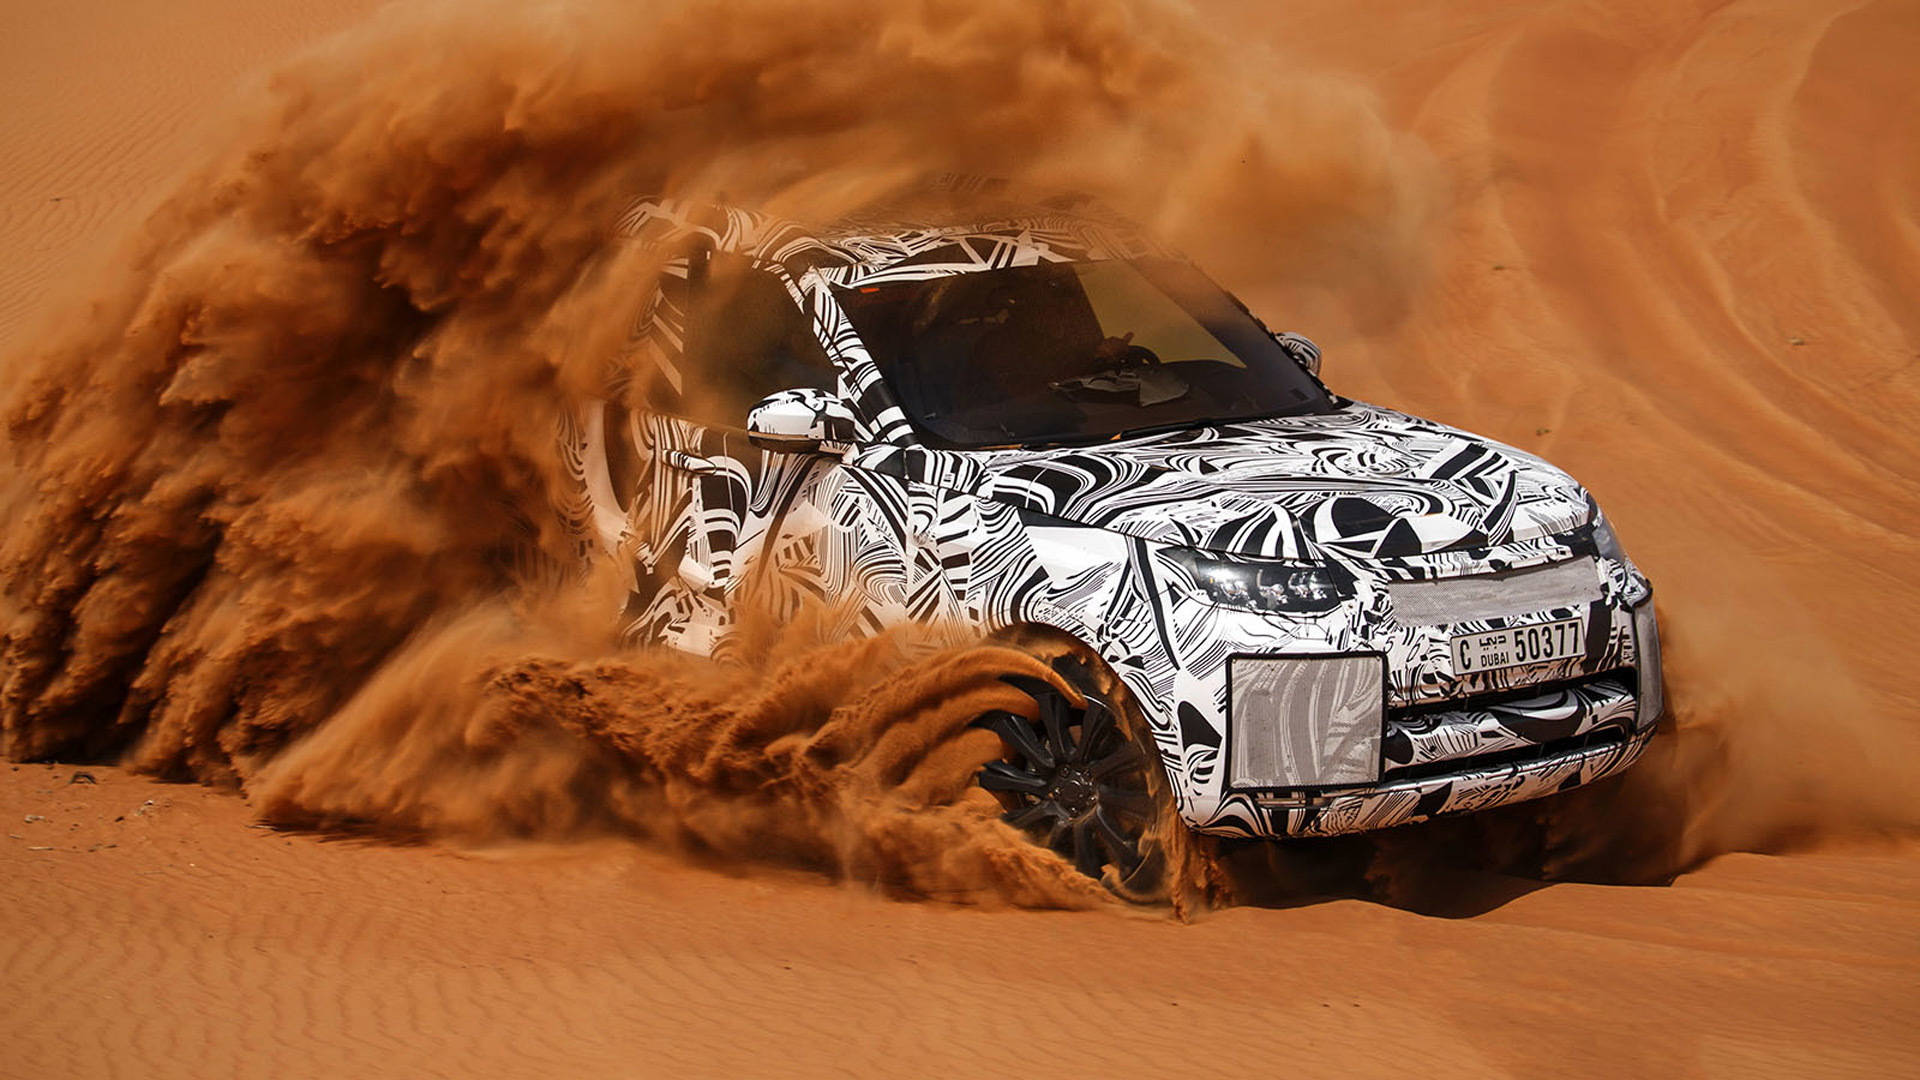 2018 Land Rover Discovery off-road testing